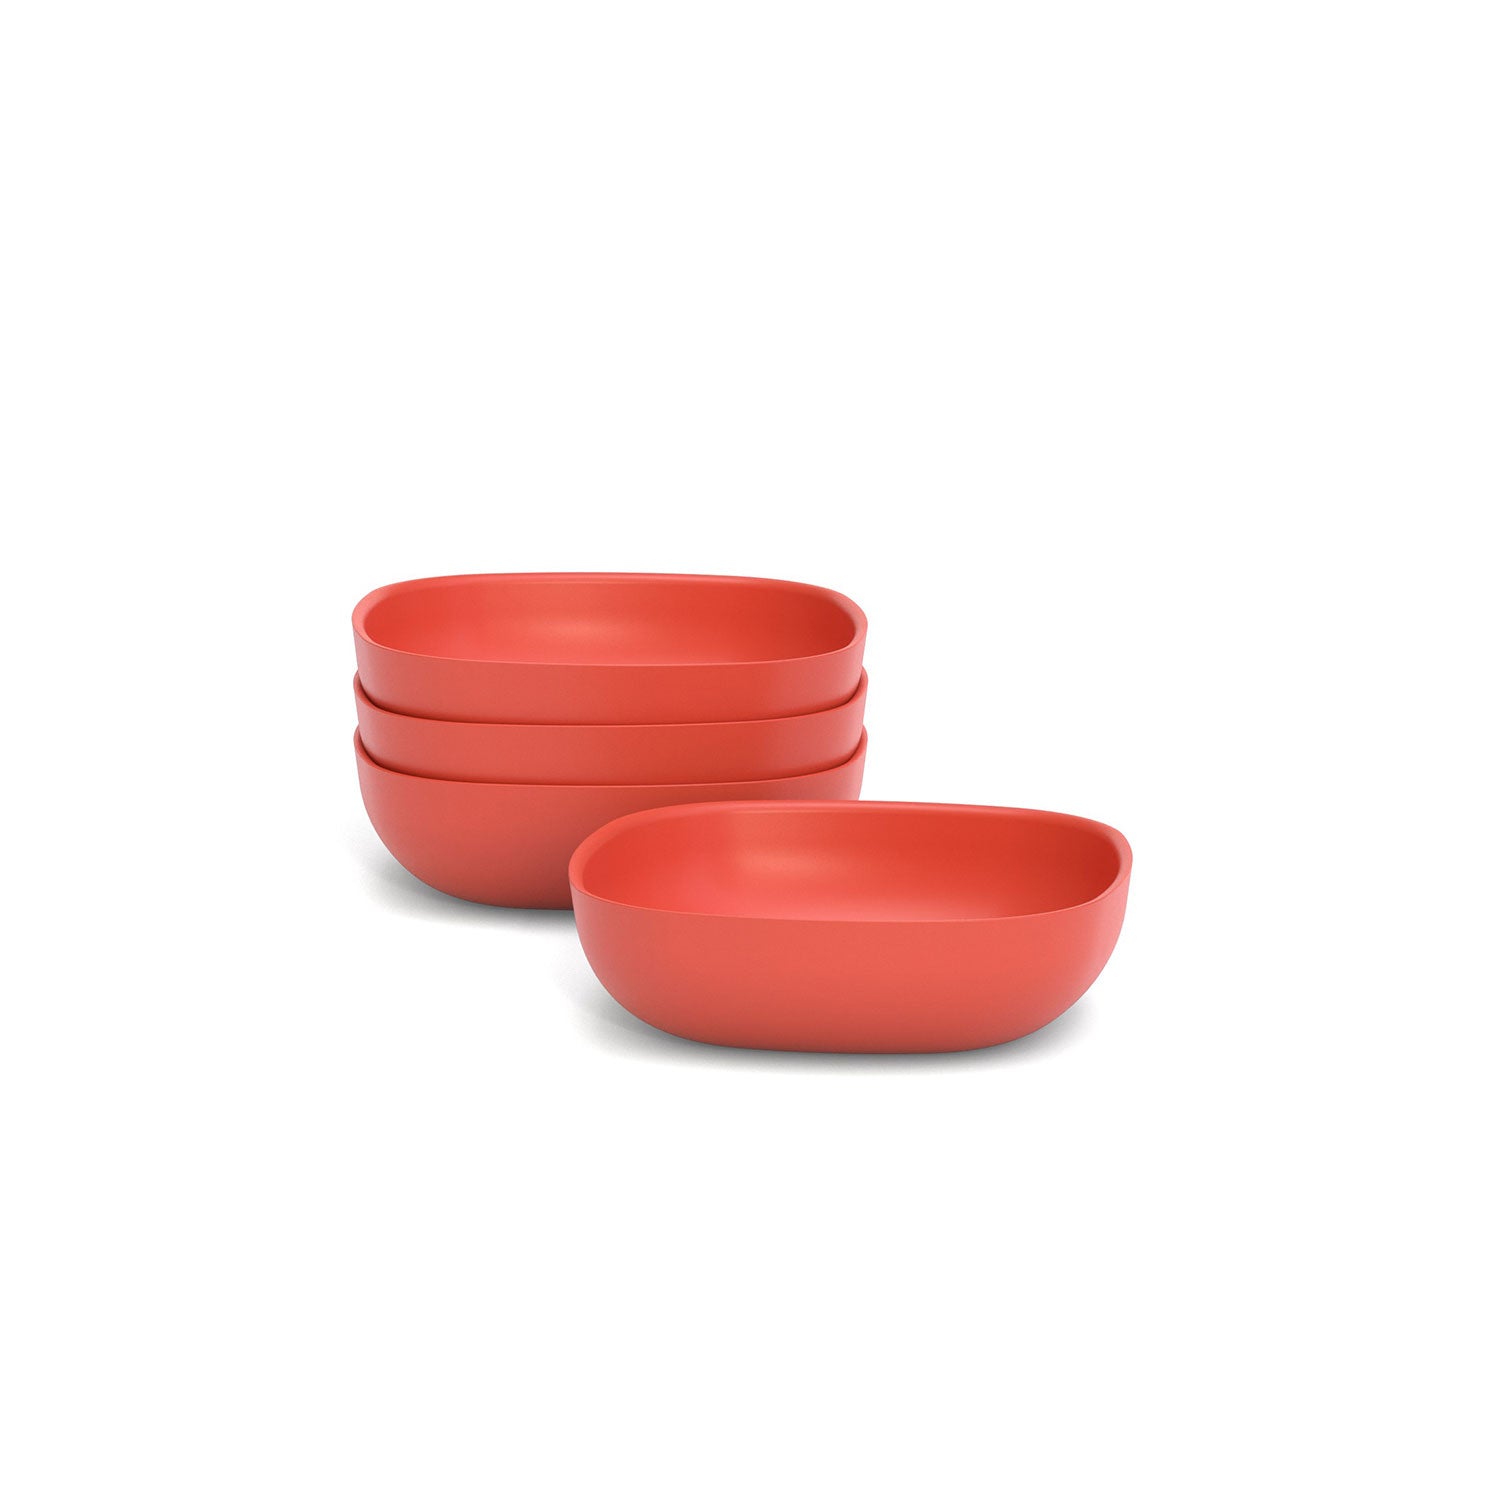 Bamboo Solo Salad Bowl - Set of 4 - Persimmon